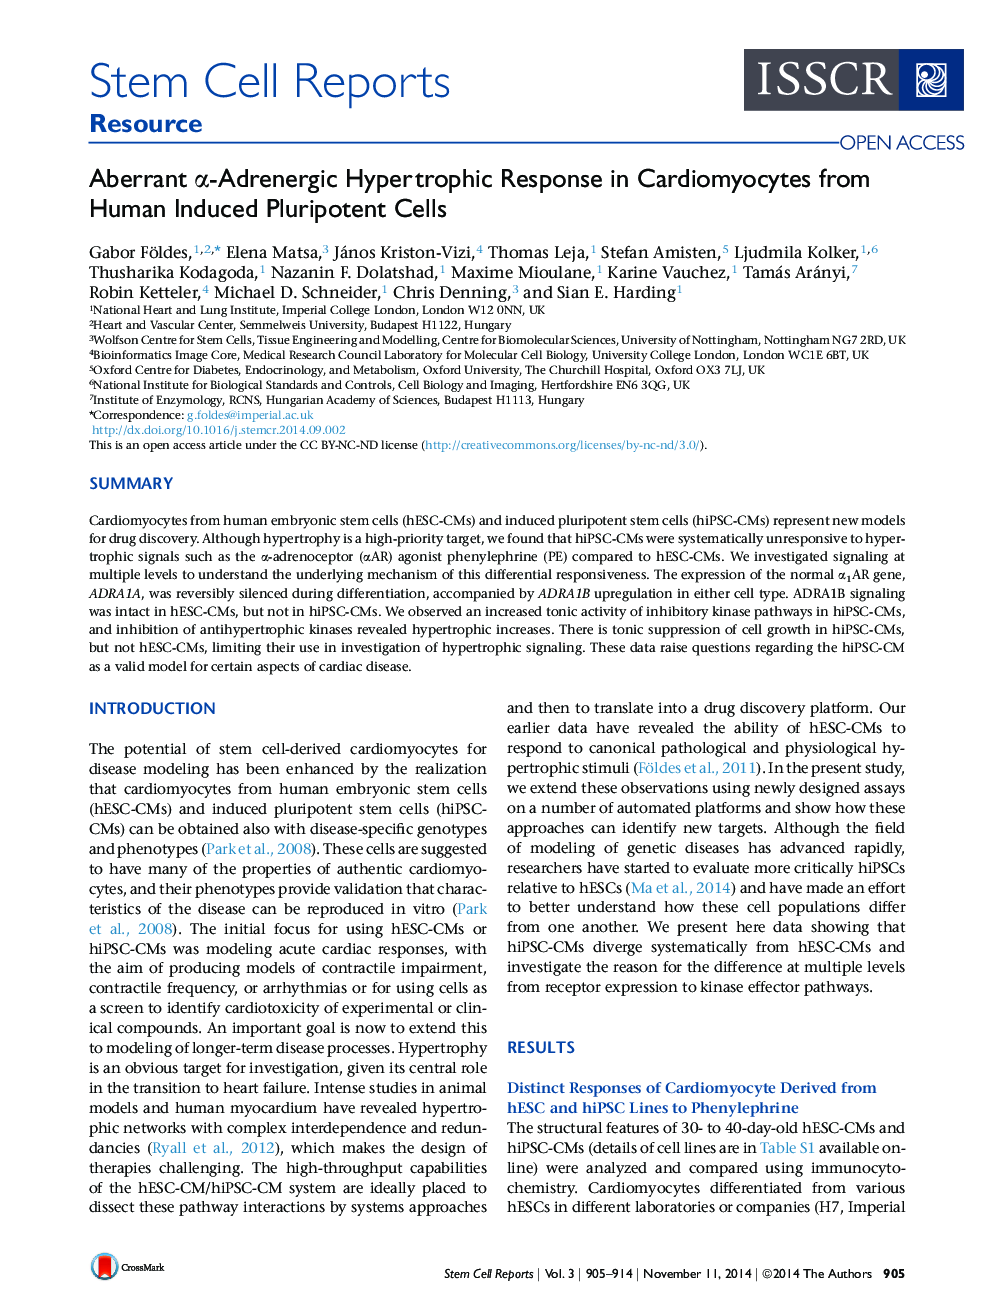 Aberrant α-Adrenergic Hypertrophic Response in Cardiomyocytes from Human Induced Pluripotent Cells 